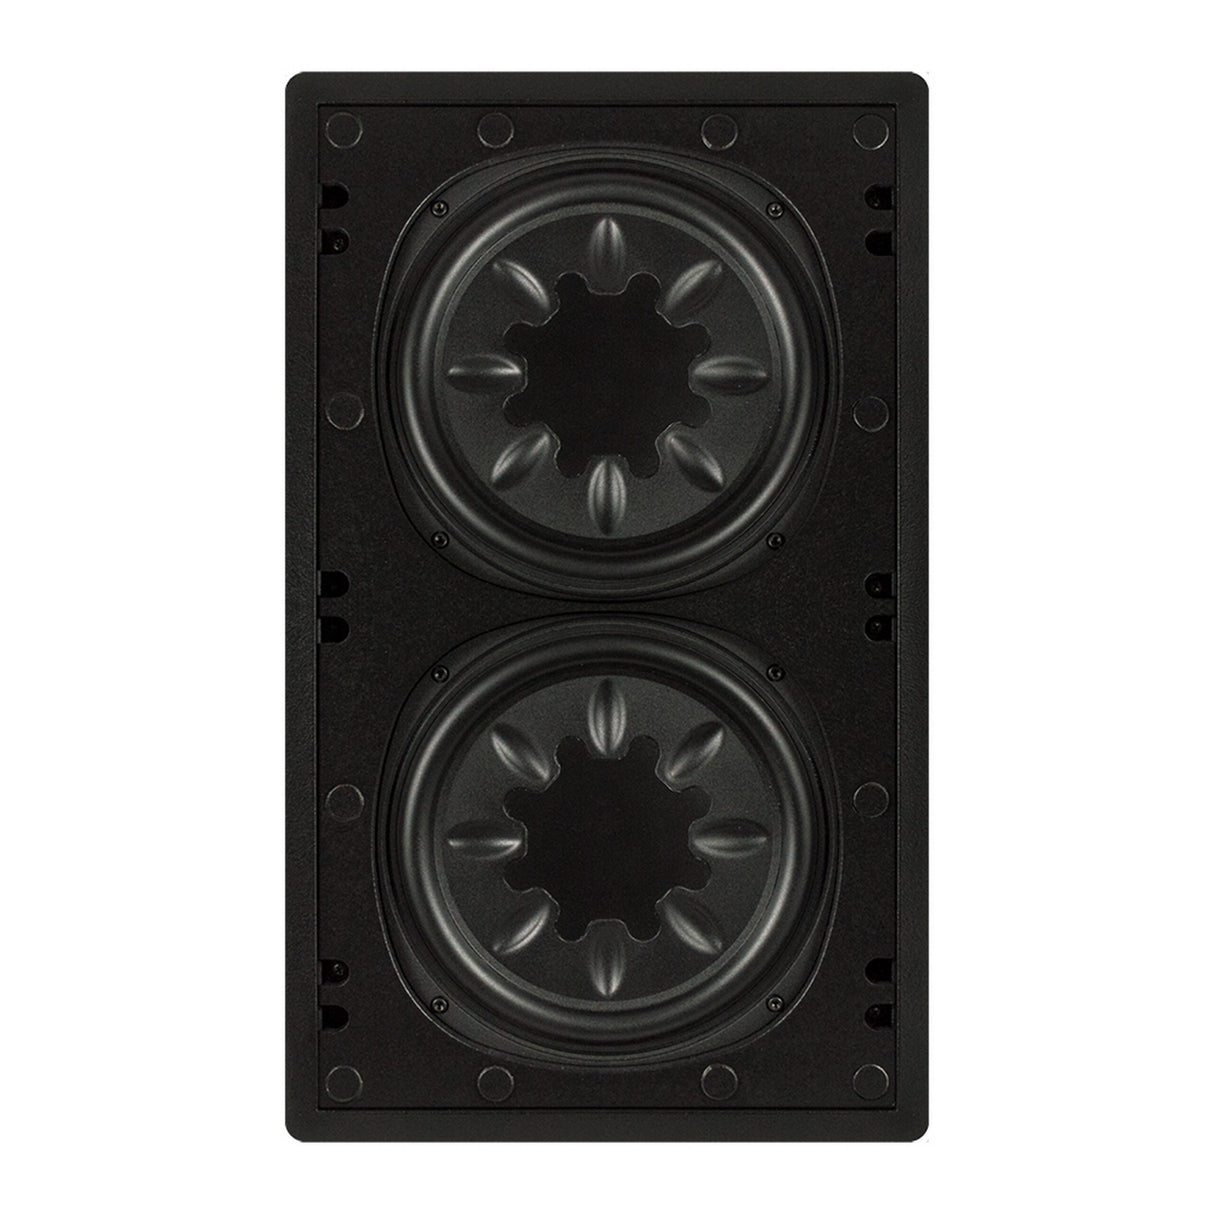 SolidDrive IW210 PhaseTech 10-Inch In-Wall Subwoofer